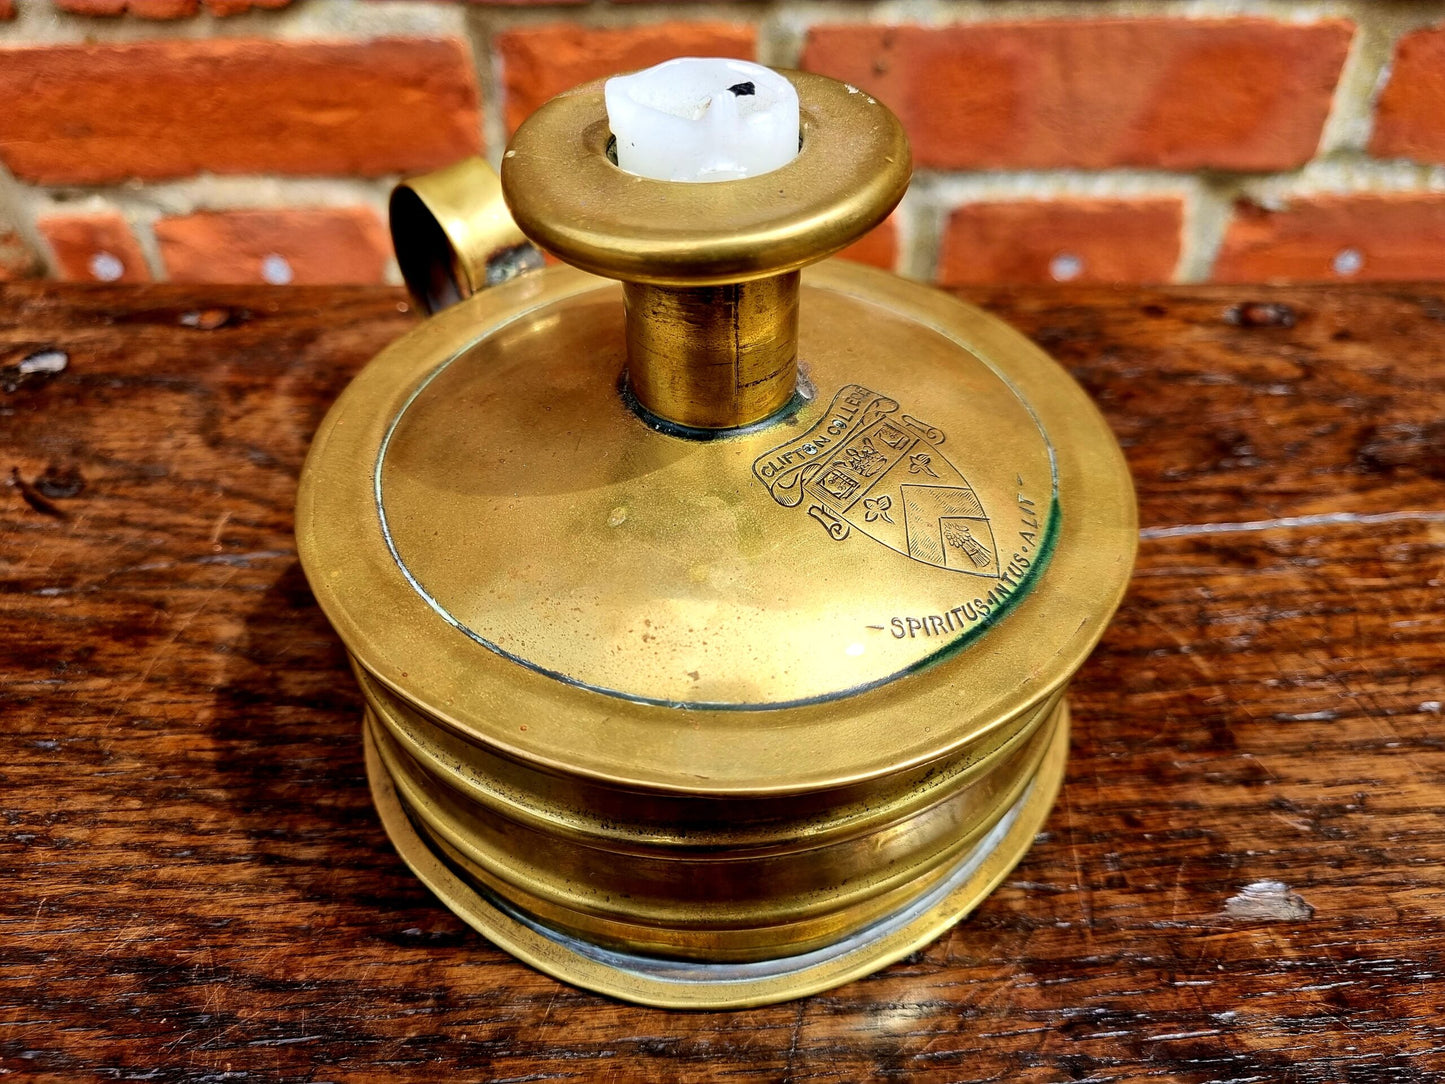 Mid 19th Century English Antique Brass Tinder Box Engraved With The Coat of Arms of Clifton College, Bristol, England